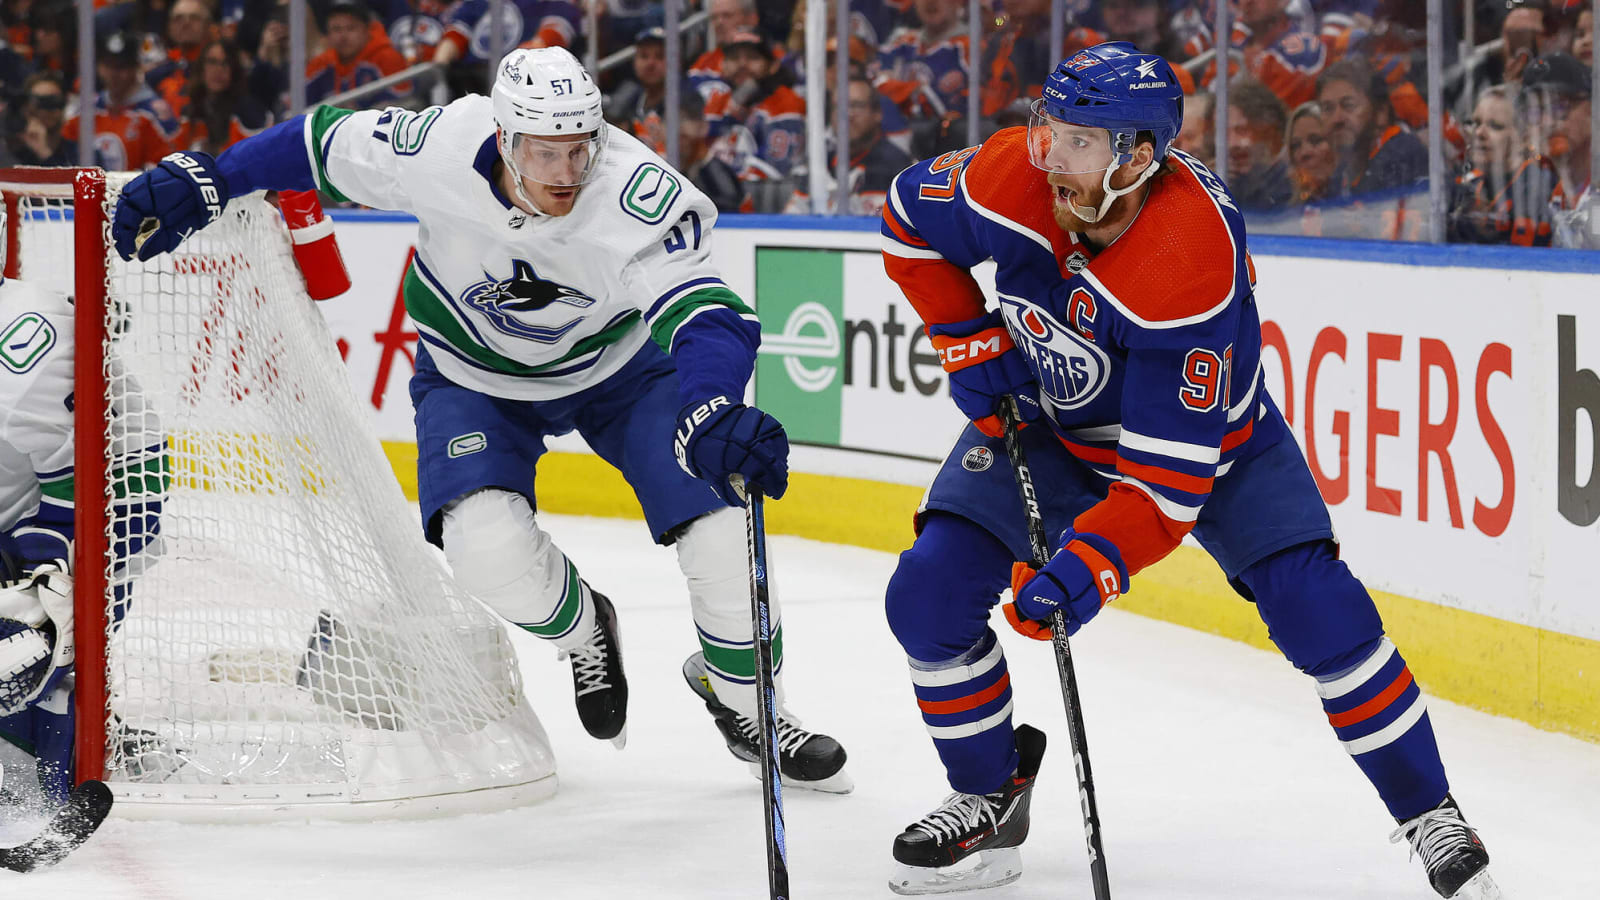 Connor McDavid, Oilers hammer Canucks to force Game 7